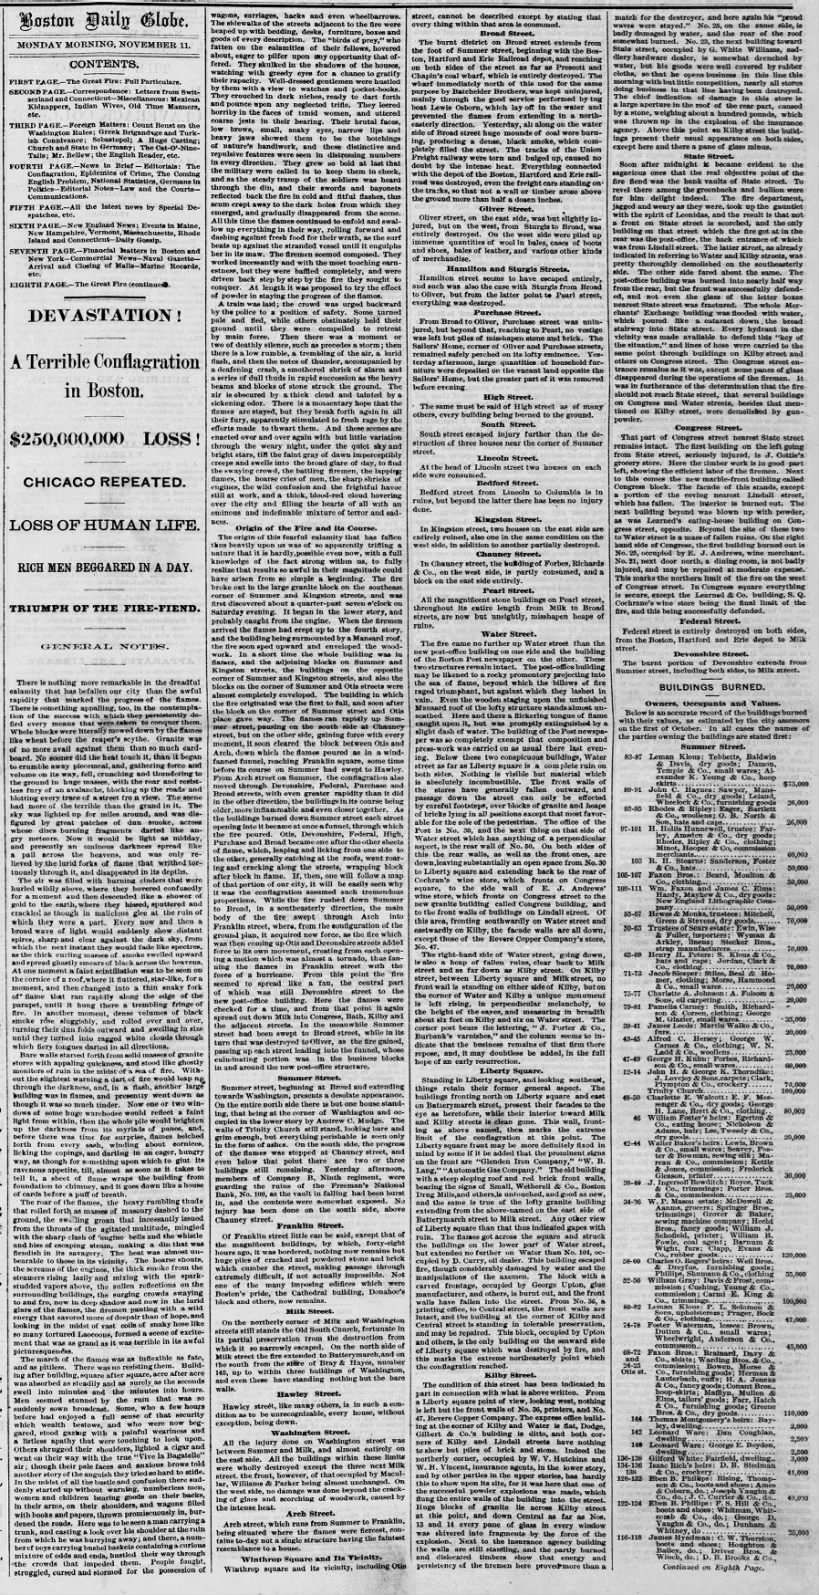 Report of the Great Boston Fire